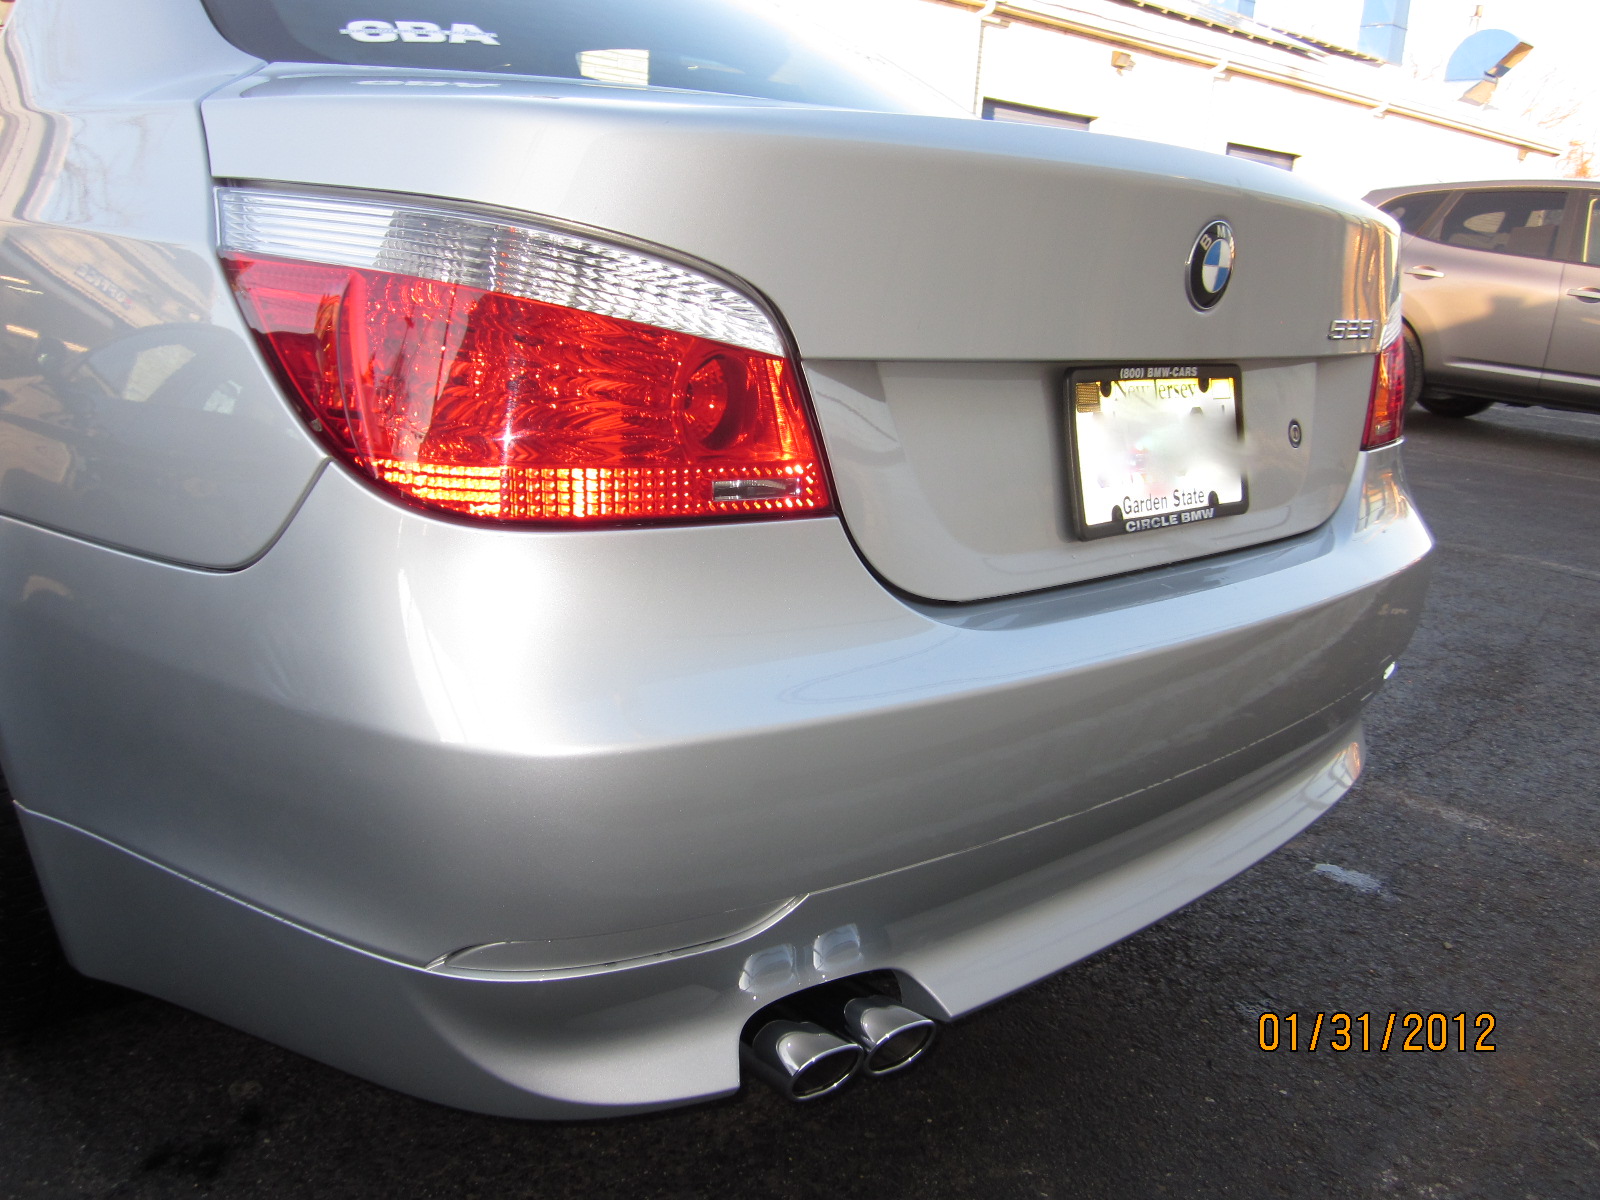 2006 BMW 525i - Before/After Photos